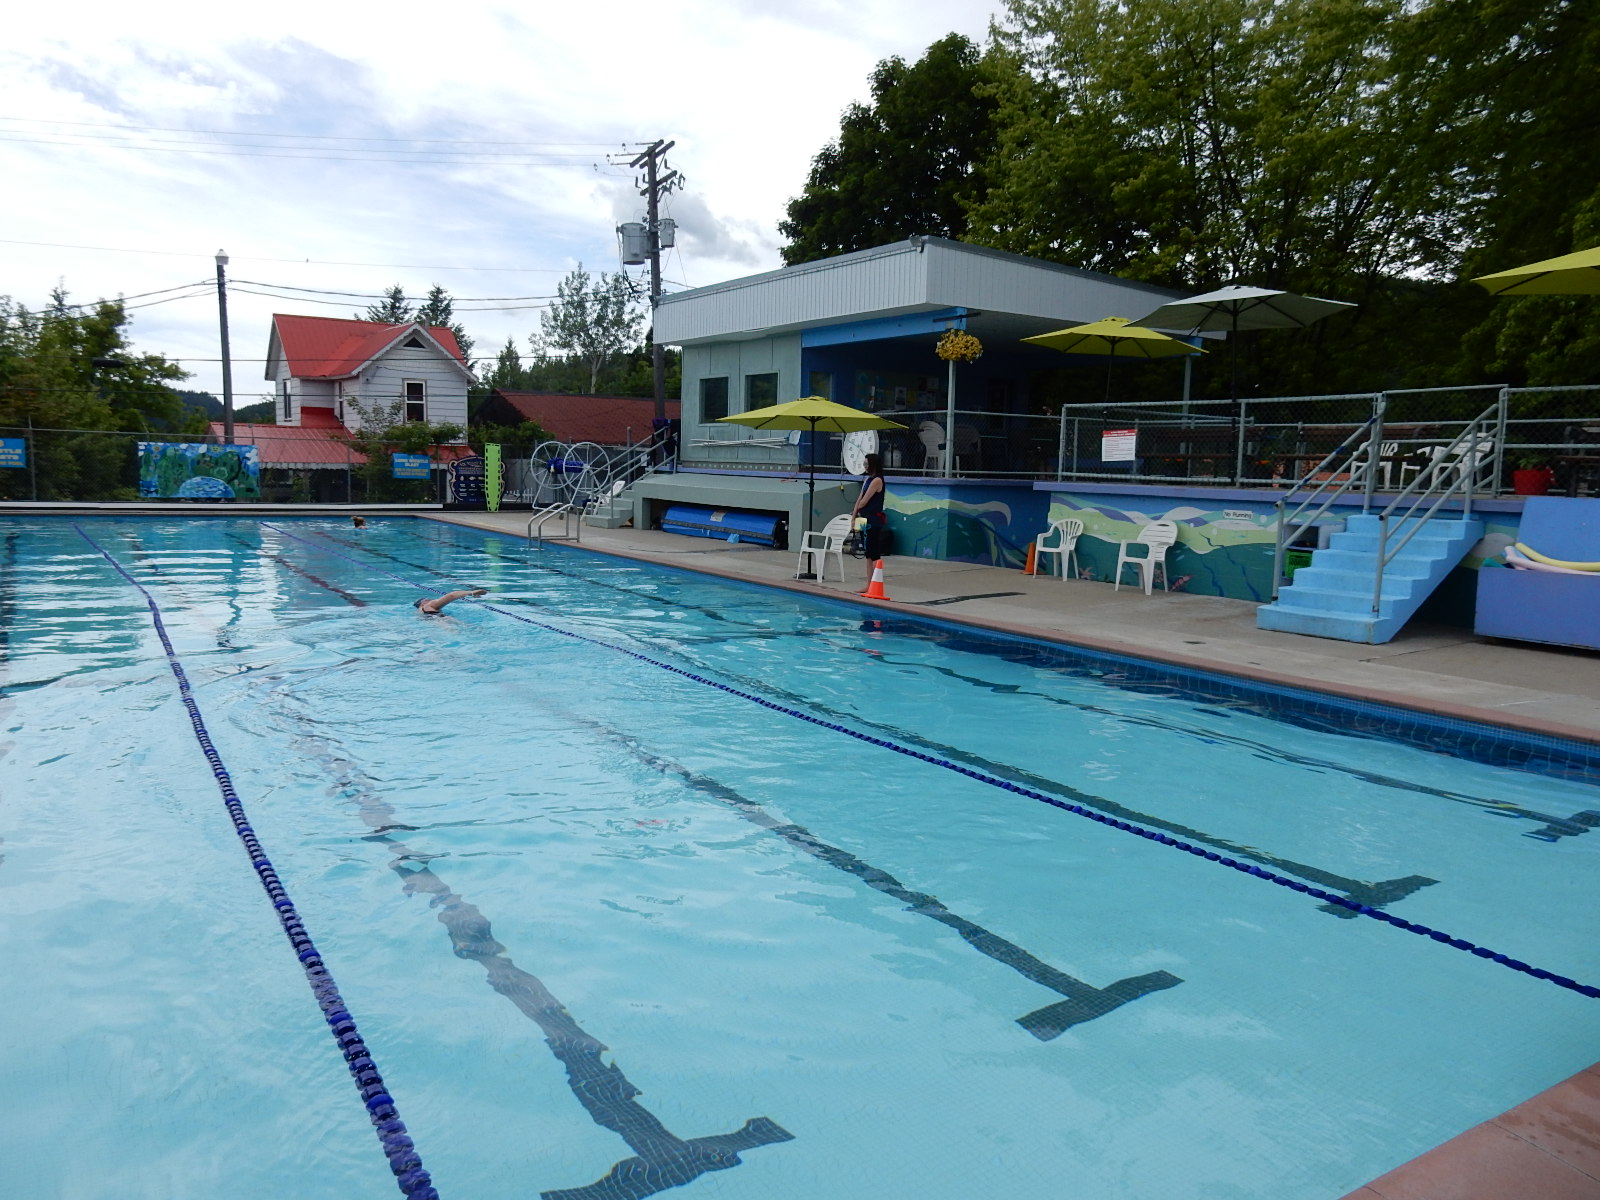 Rossland's Pool is 85 this summer